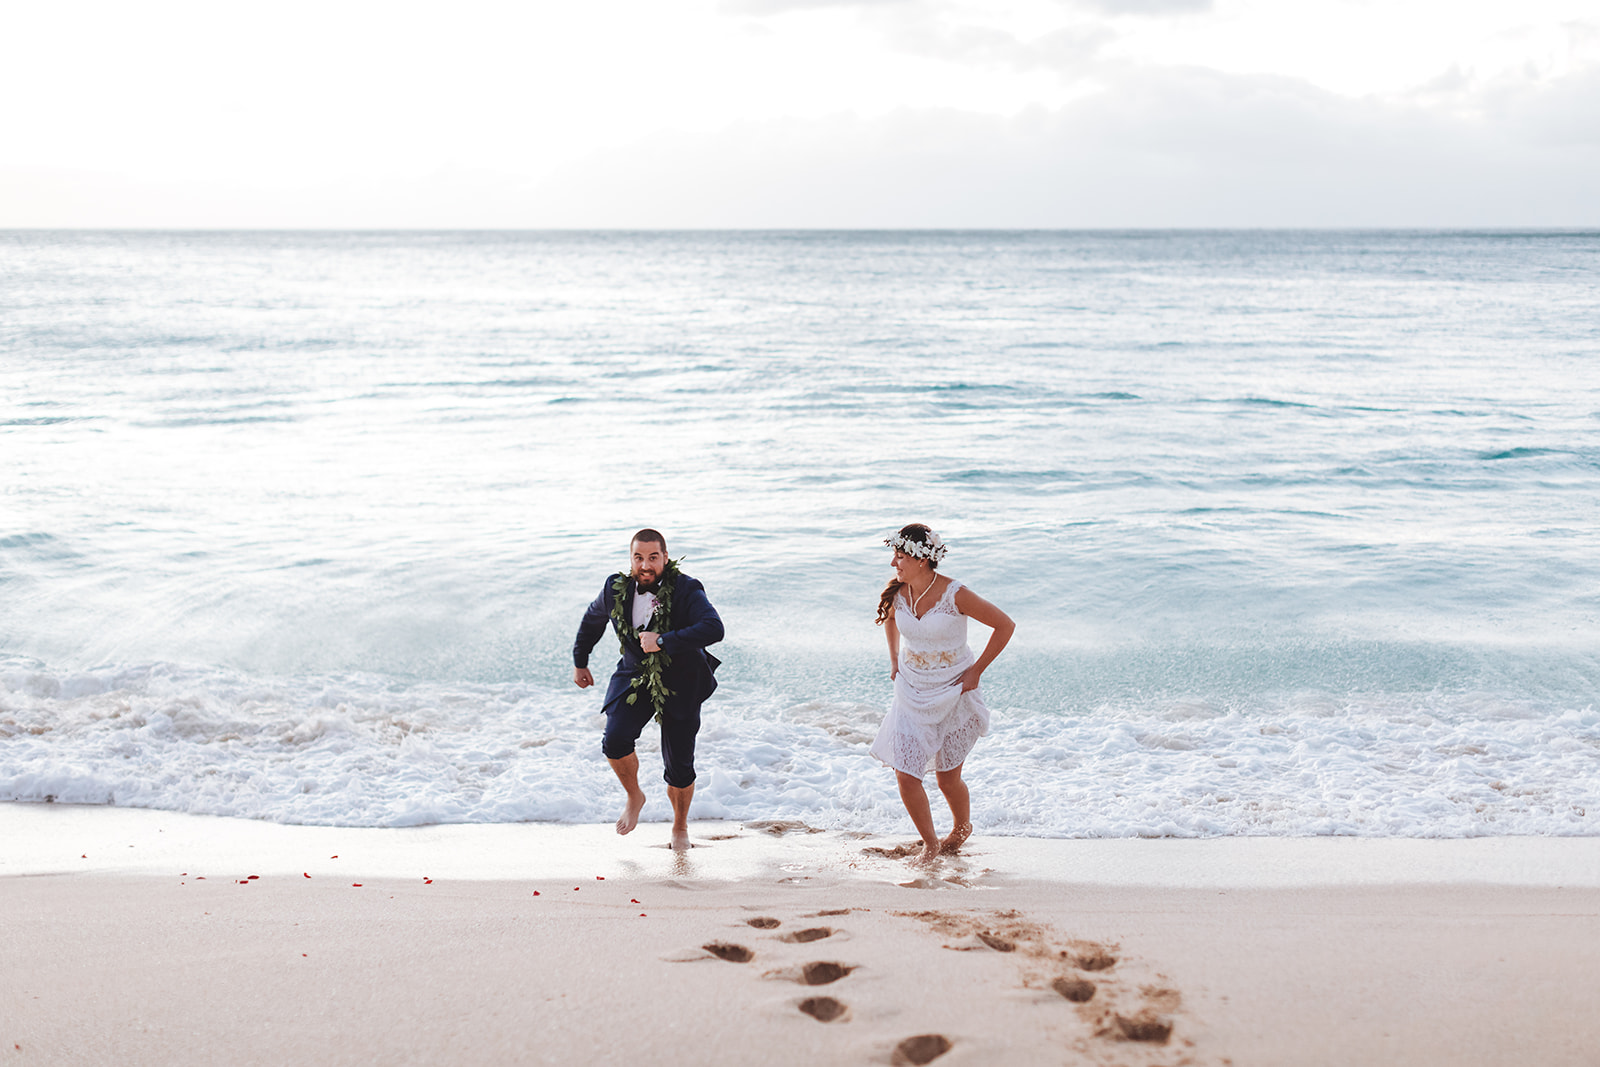 Newlyweds Paul & Kaitlyn running on the beach during an elopement photography session